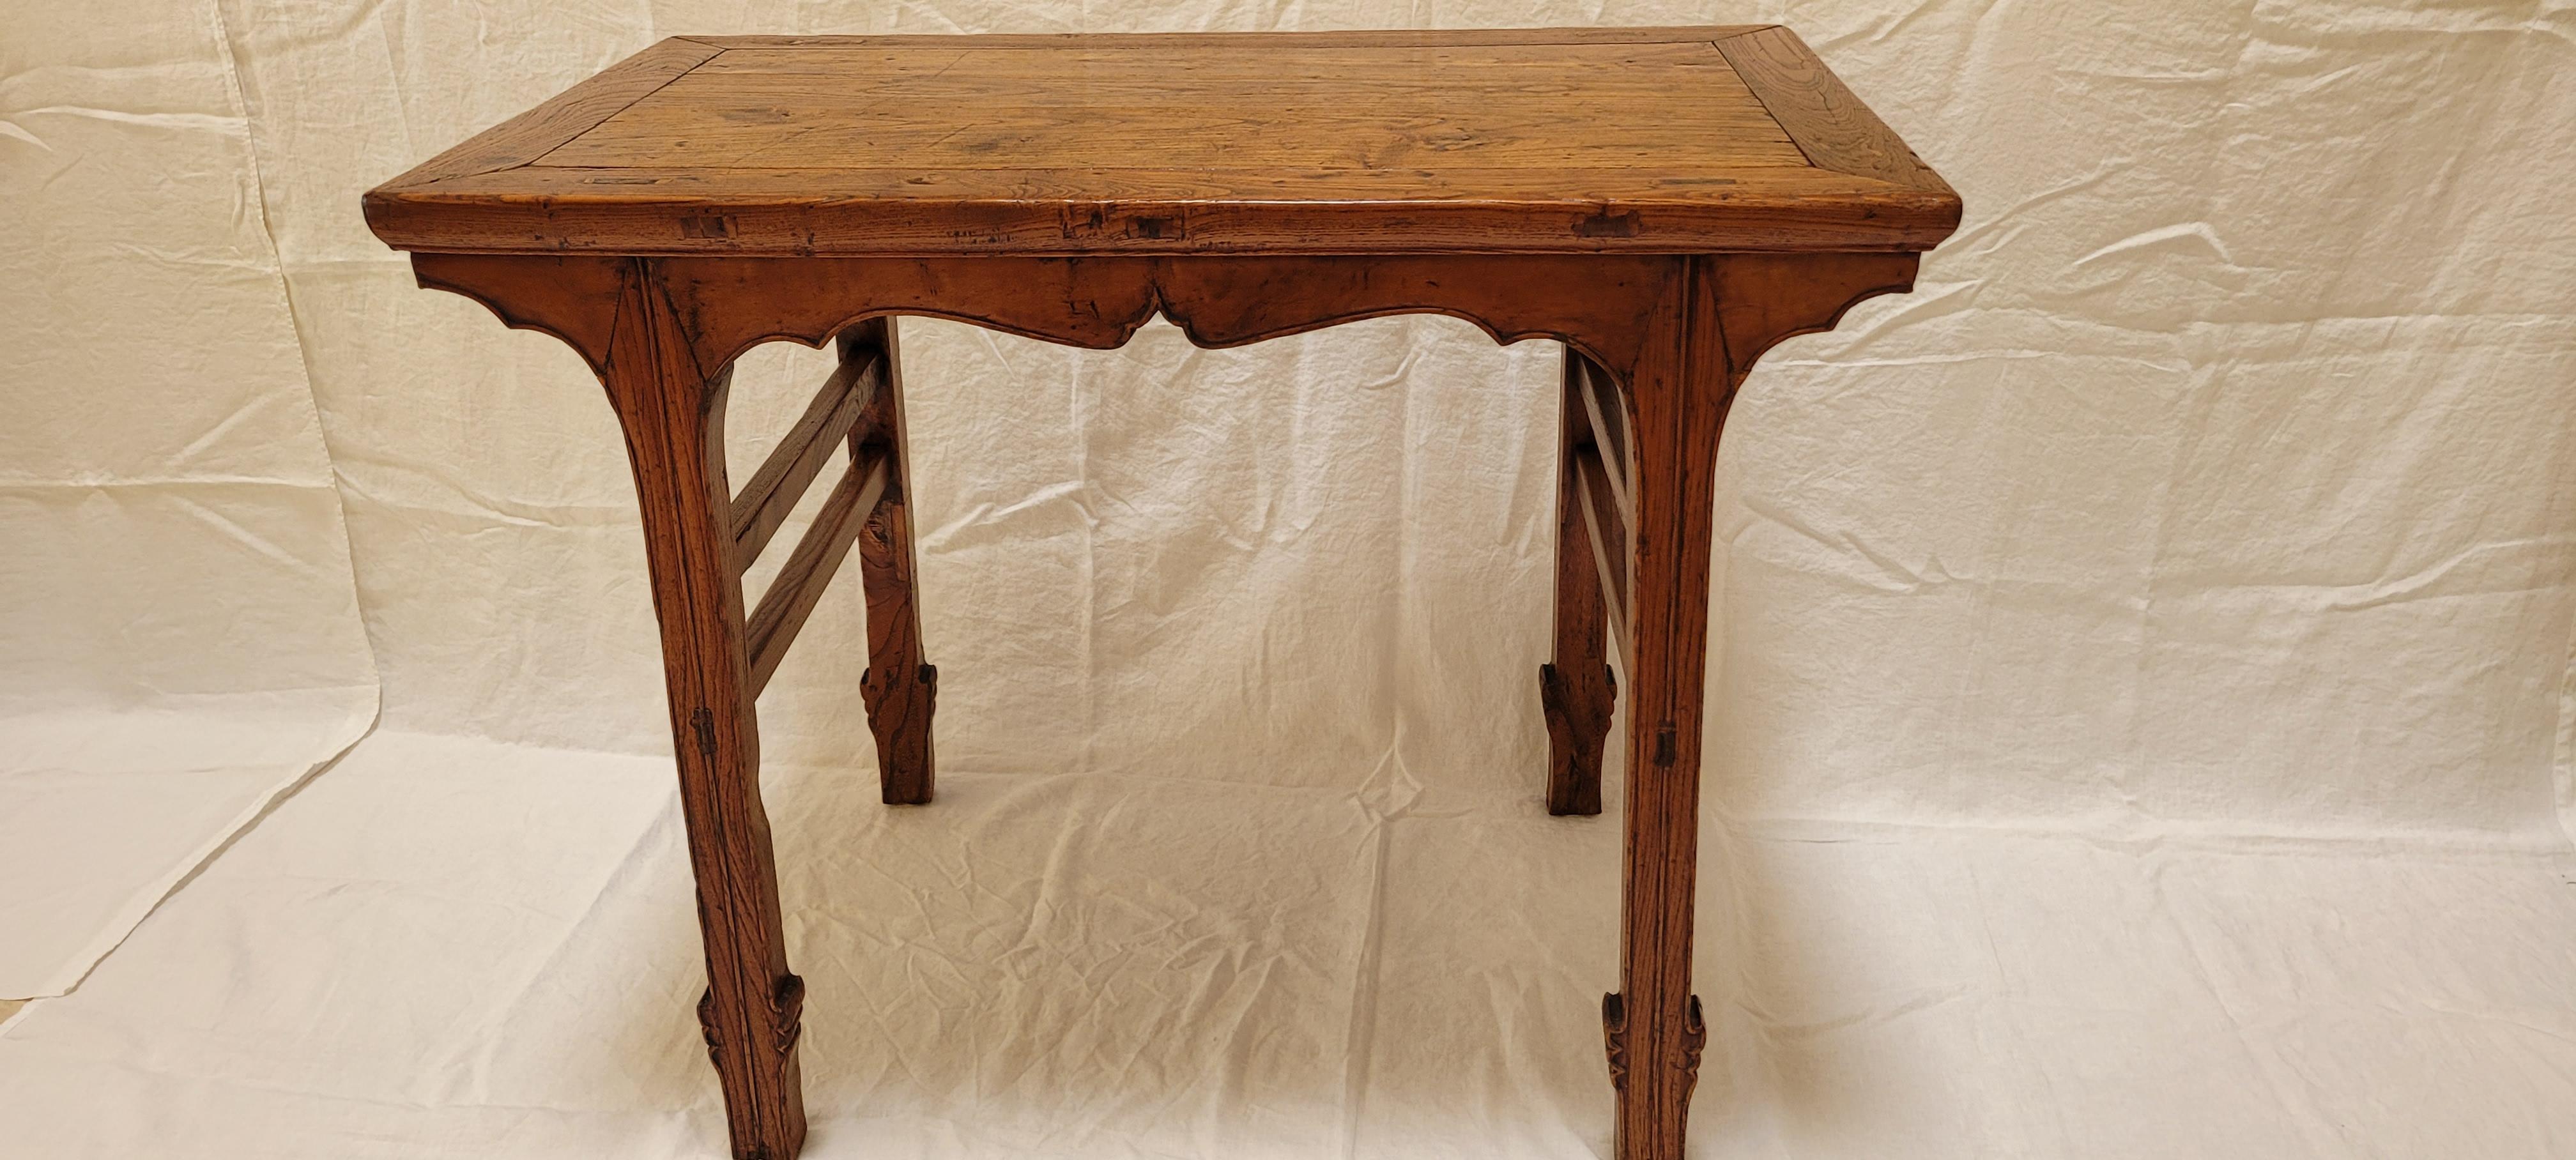 17th Century Wine Table - 1650 -1700 For Sale 14